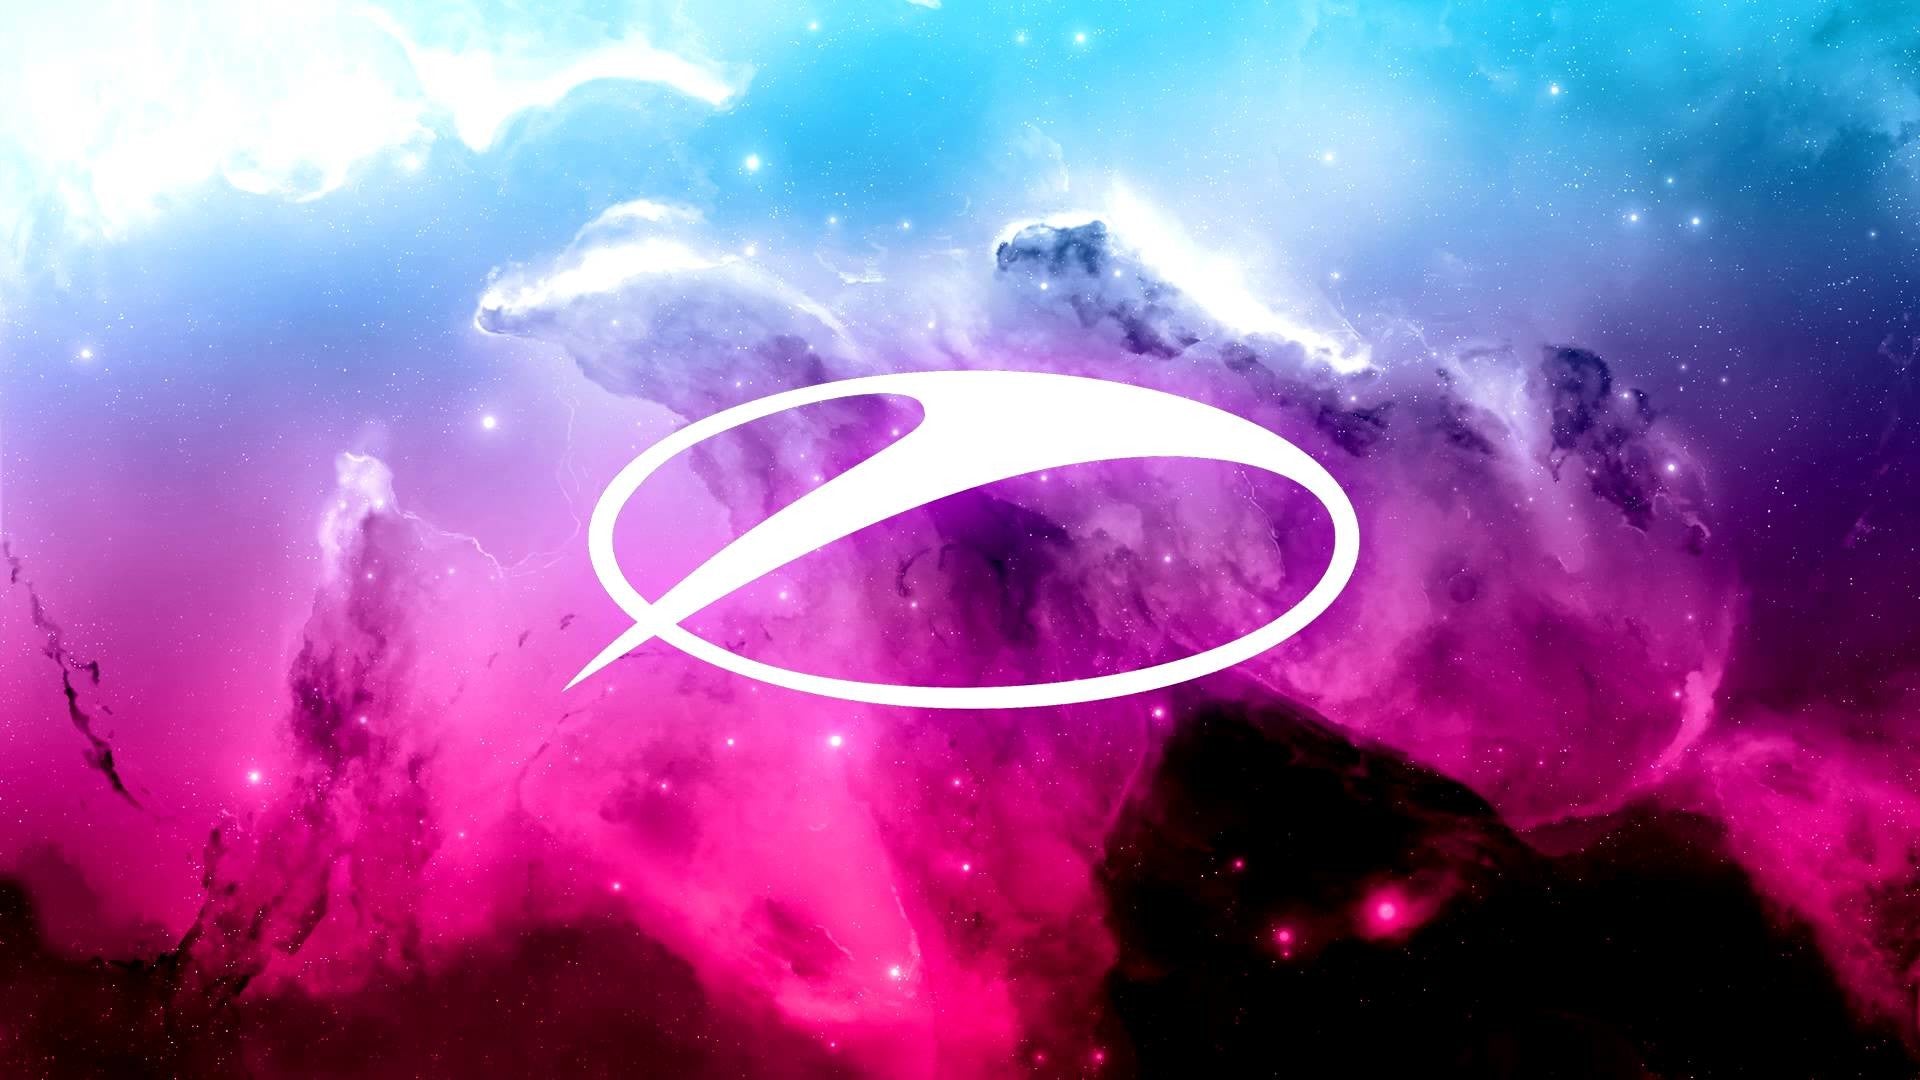 A State of Trance ASOT 1000 Birthday Audio & Video DJ-Sets 128GB USB SPECIAL Compilation (2021 - 2023)